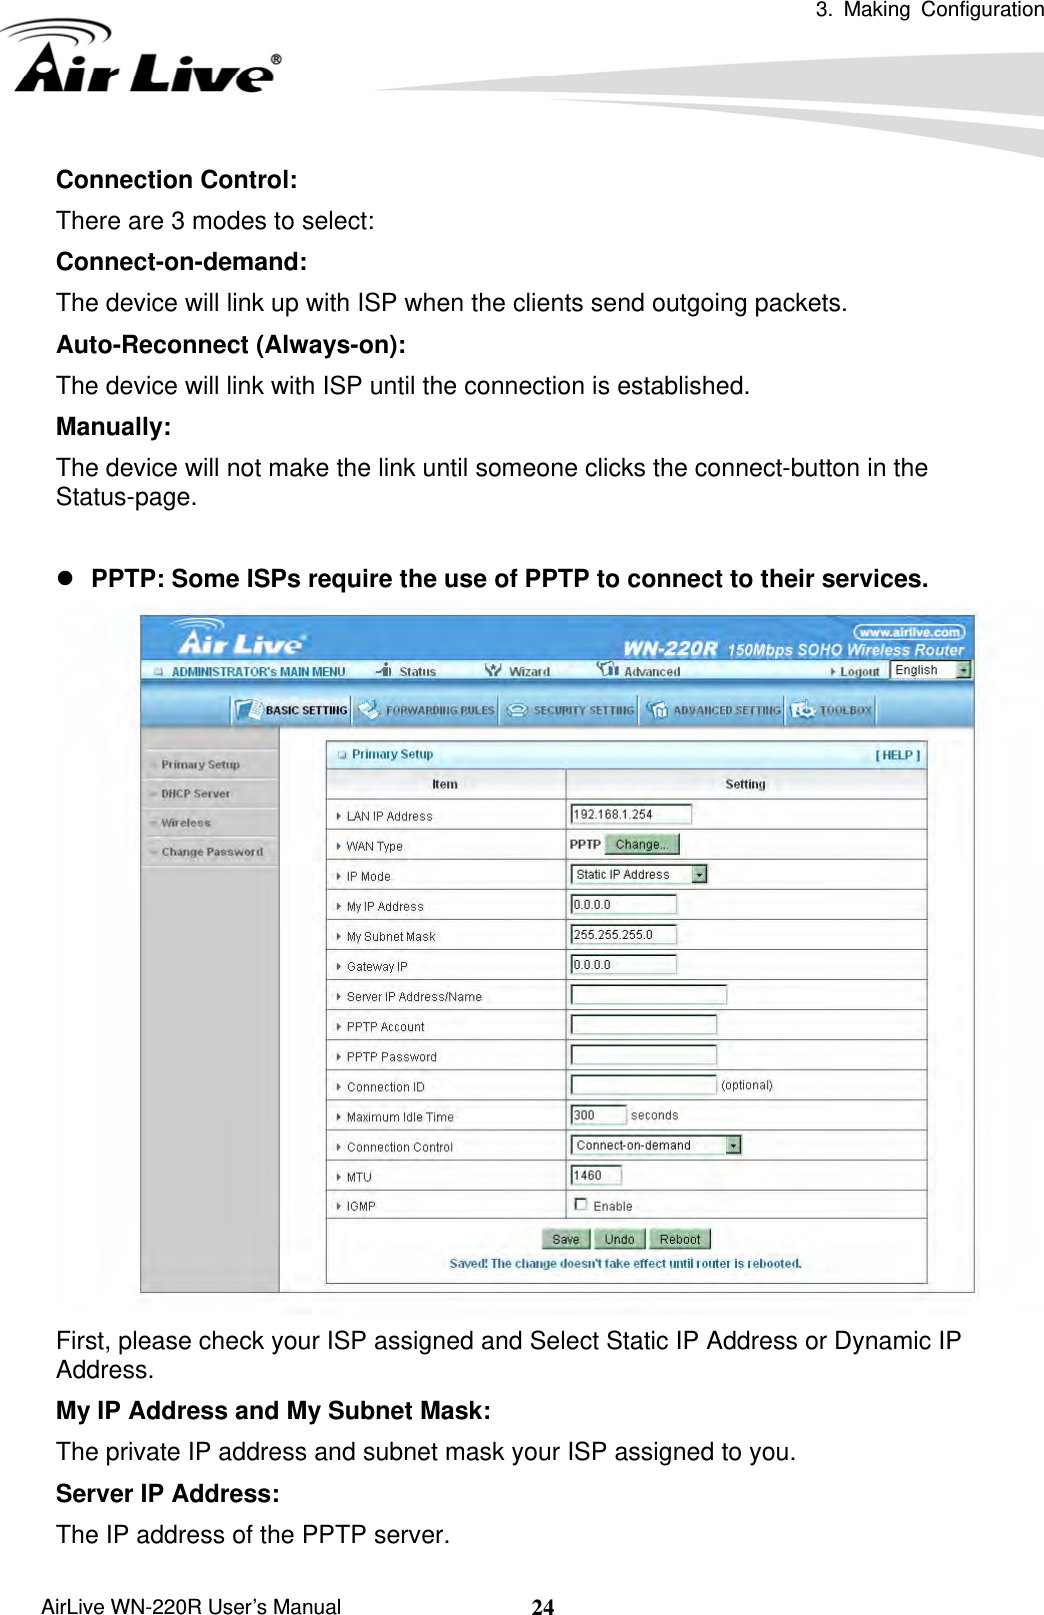  3. Making Configuration       AirLive WN-220R User’s Manual  24Connection Control:   There are 3 modes to select: Connect-on-demand:  The device will link up with ISP when the clients send outgoing packets. Auto-Reconnect (Always-on): The device will link with ISP until the connection is established. Manually: The device will not make the link until someone clicks the connect-button in the Status-page.  z PPTP: Some ISPs require the use of PPTP to connect to their services.  First, please check your ISP assigned and Select Static IP Address or Dynamic IP Address. My IP Address and My Subnet Mask:   The private IP address and subnet mask your ISP assigned to you.   Server IP Address:   The IP address of the PPTP server.   